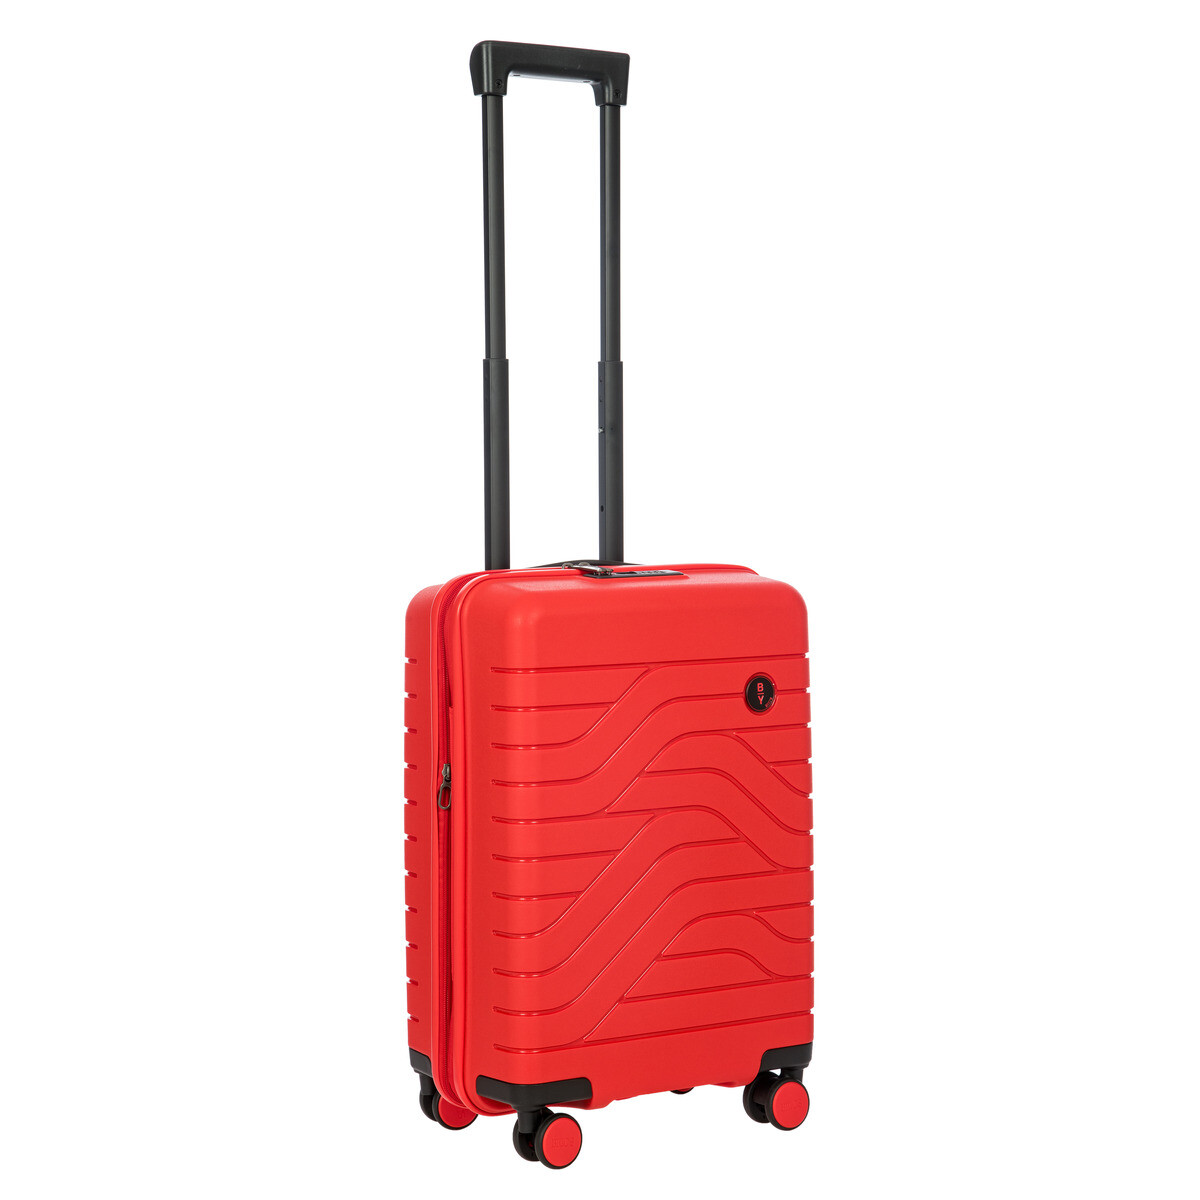 BRIC ULISEE 21" Expandable Spinner Red